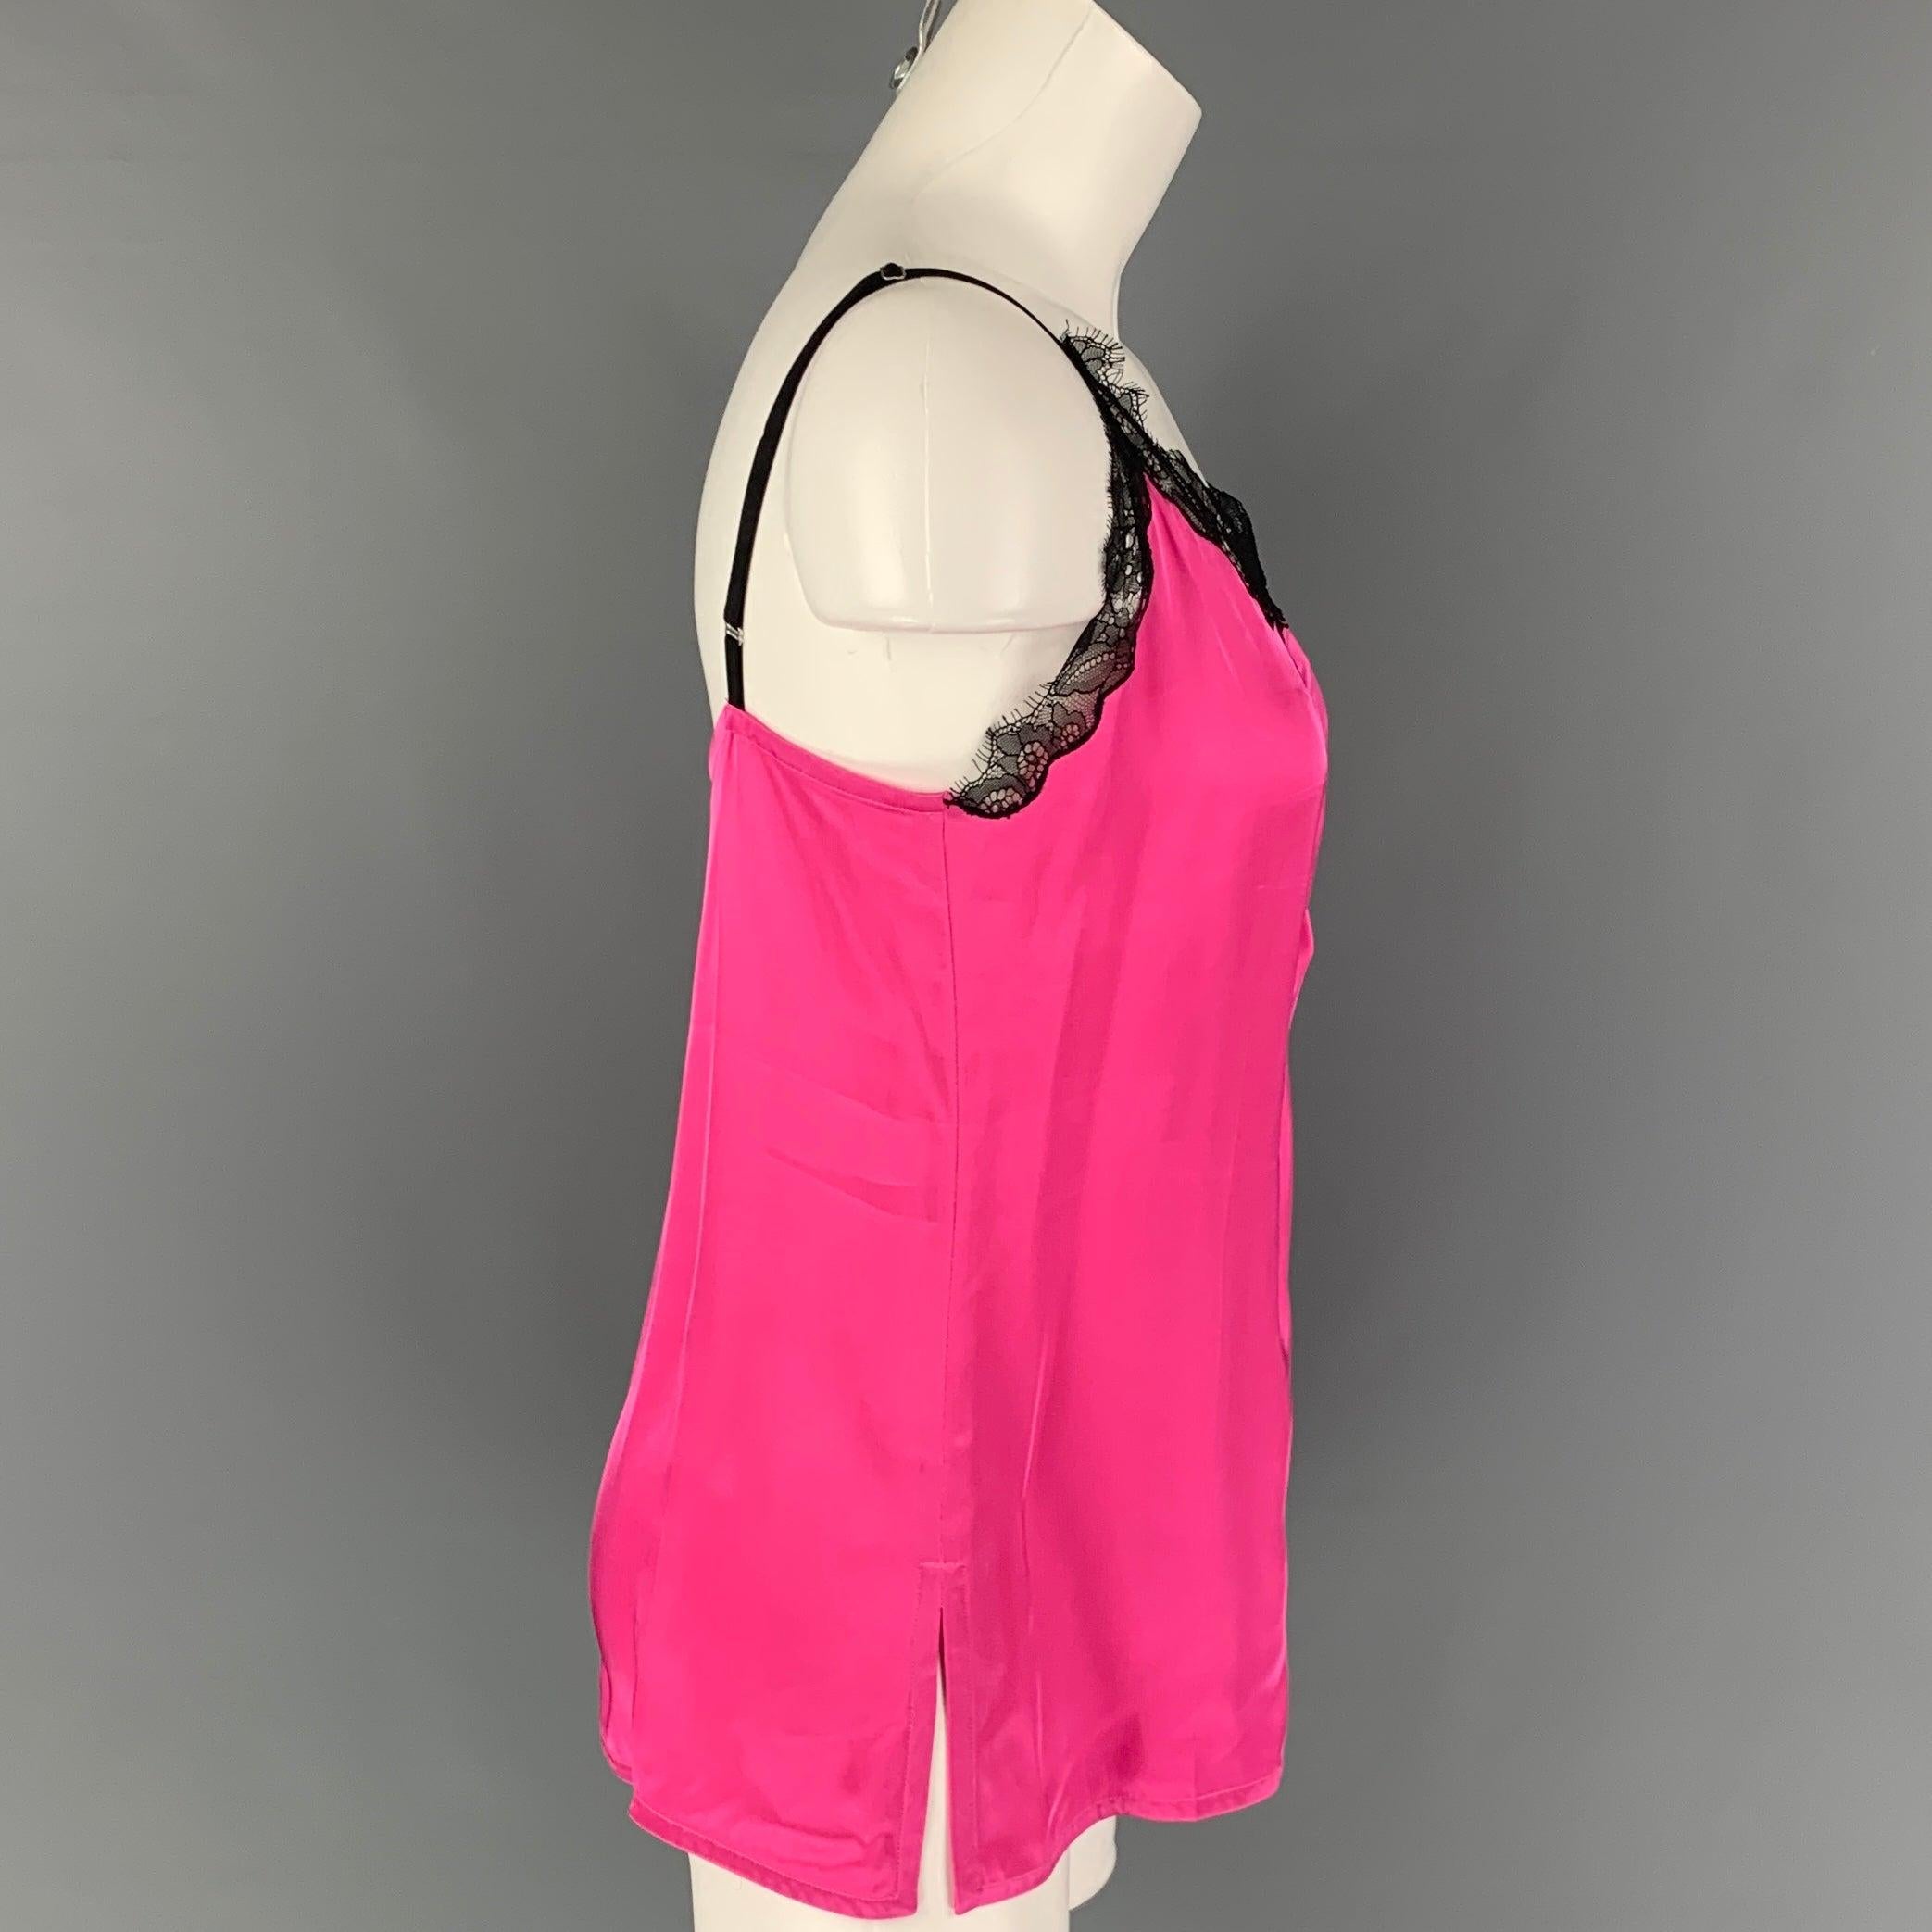 HELMUT LANG top comes in a pink viscose with a black lace trim featuring side slits and spaghetti straps.
New With Tags.
 

Marked:   M  

Measurements: 
  Bust: 31 inches  Length: 32 inches 
  
  
 
Reference: 118884
Category: Dress Top
More